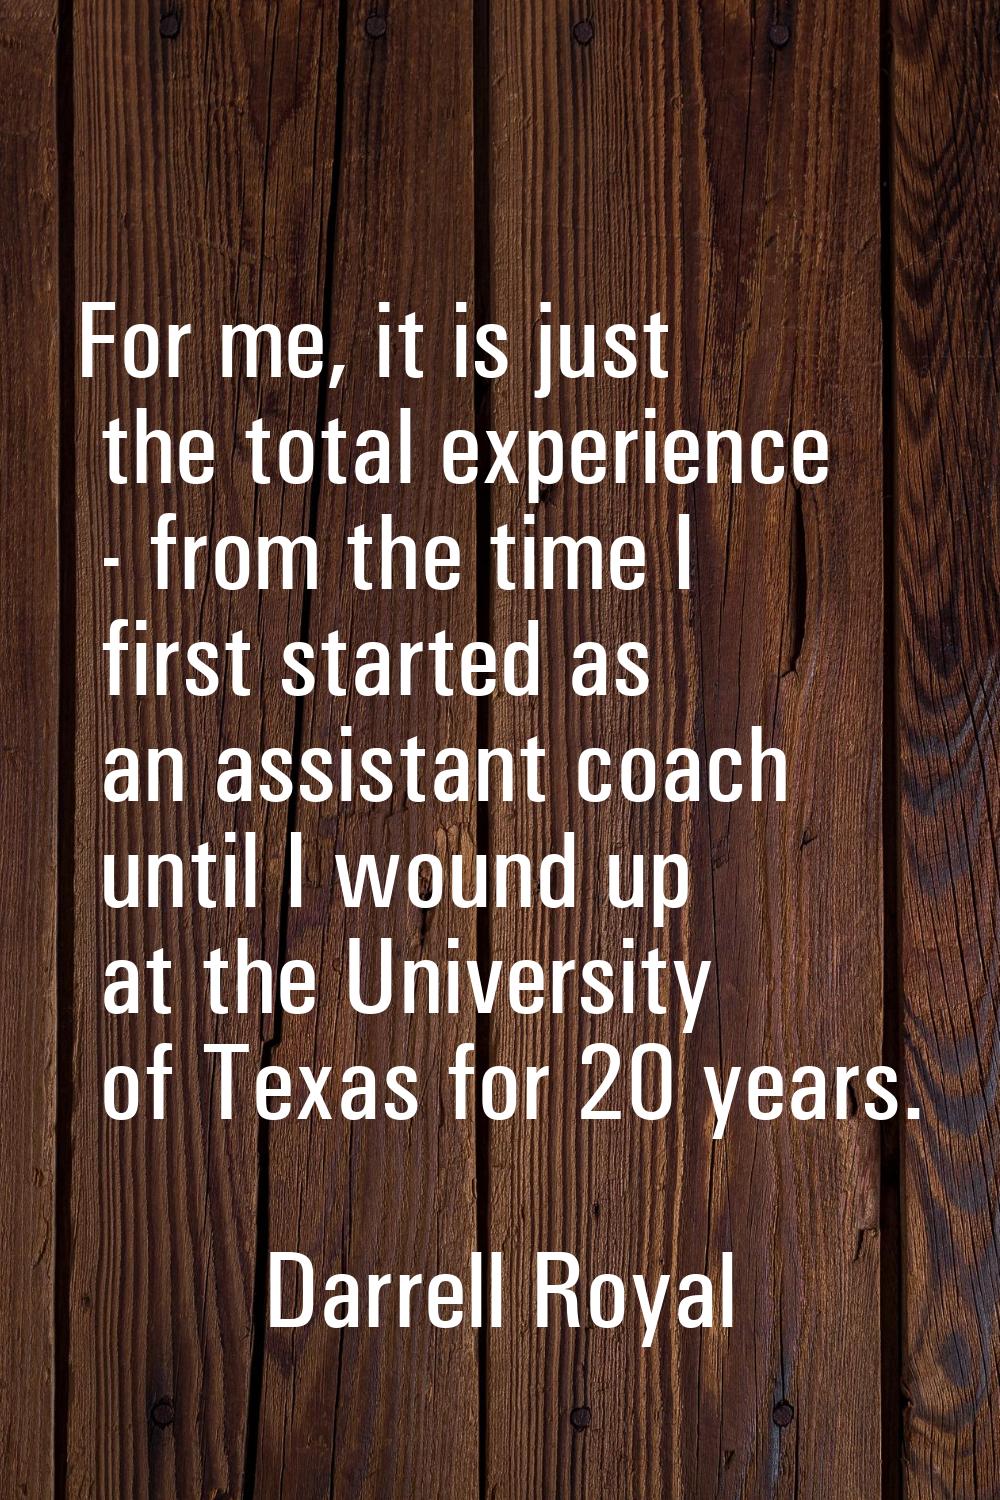 For me, it is just the total experience - from the time I first started as an assistant coach until